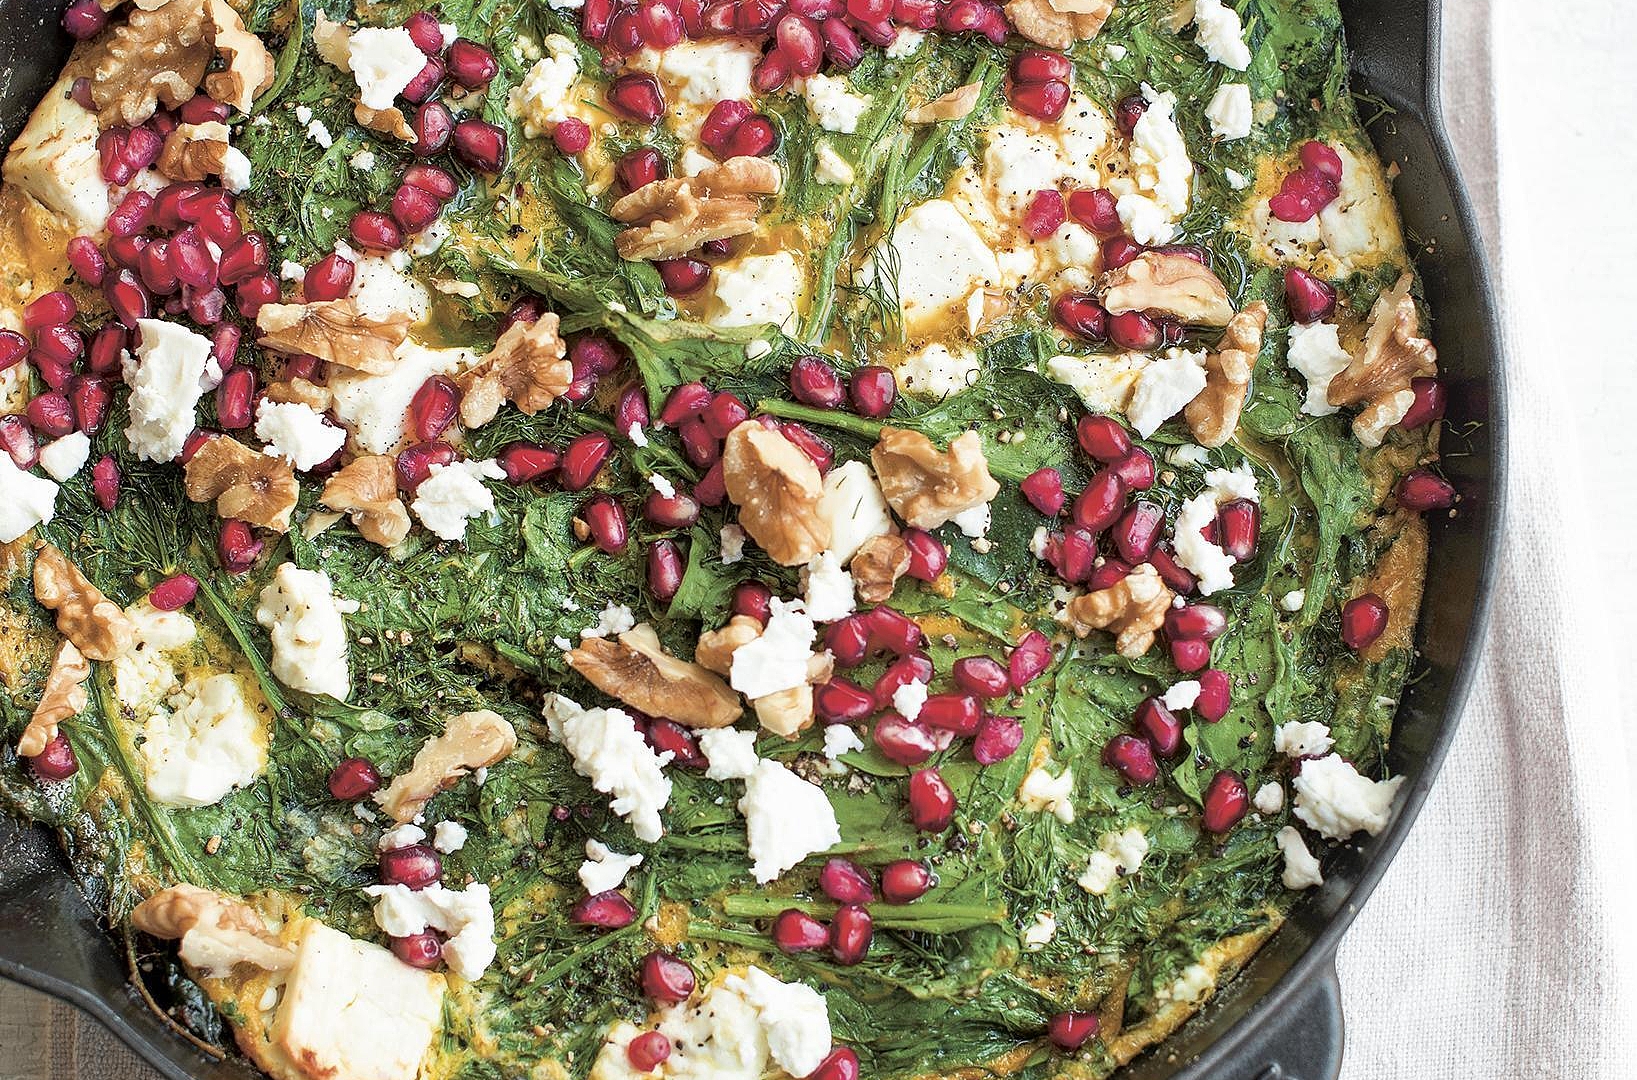 Herby spinach and feta frittata